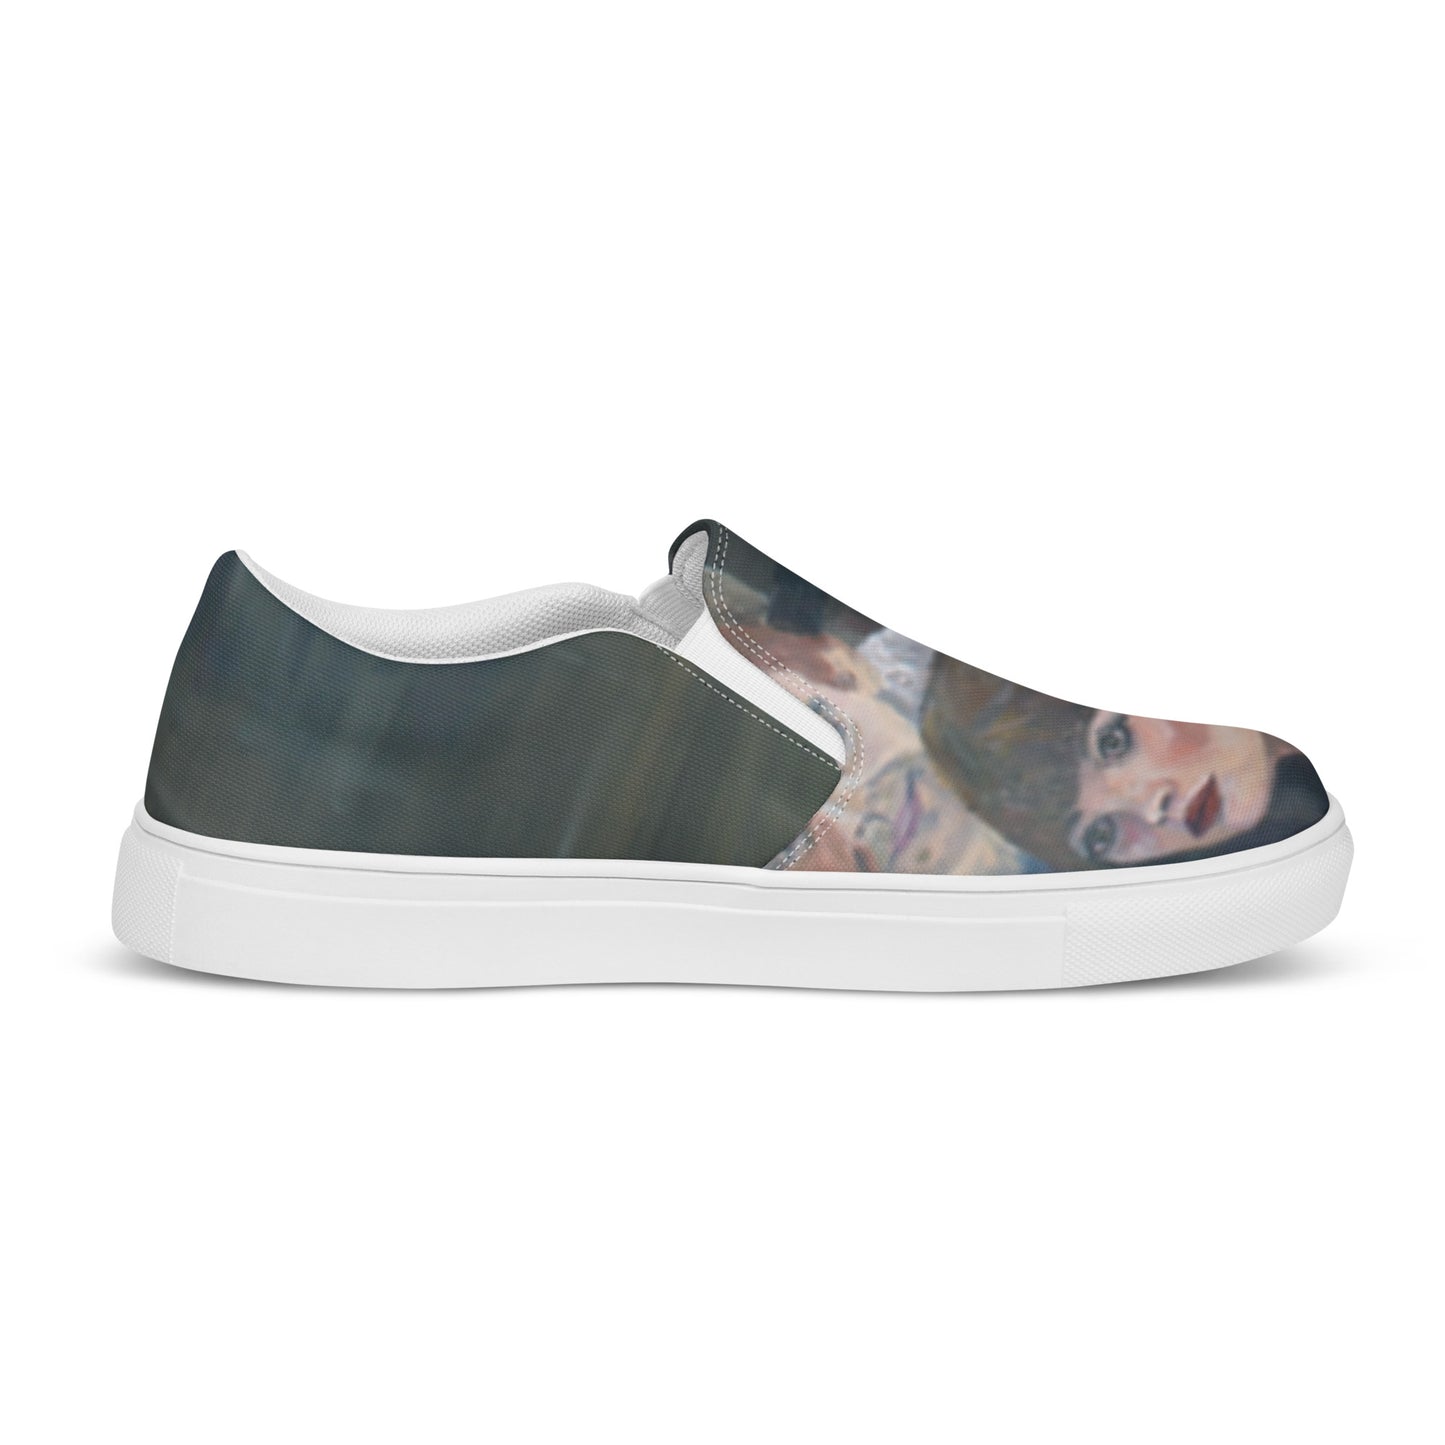 Friday Night - Women’s slip-on canvas shoes